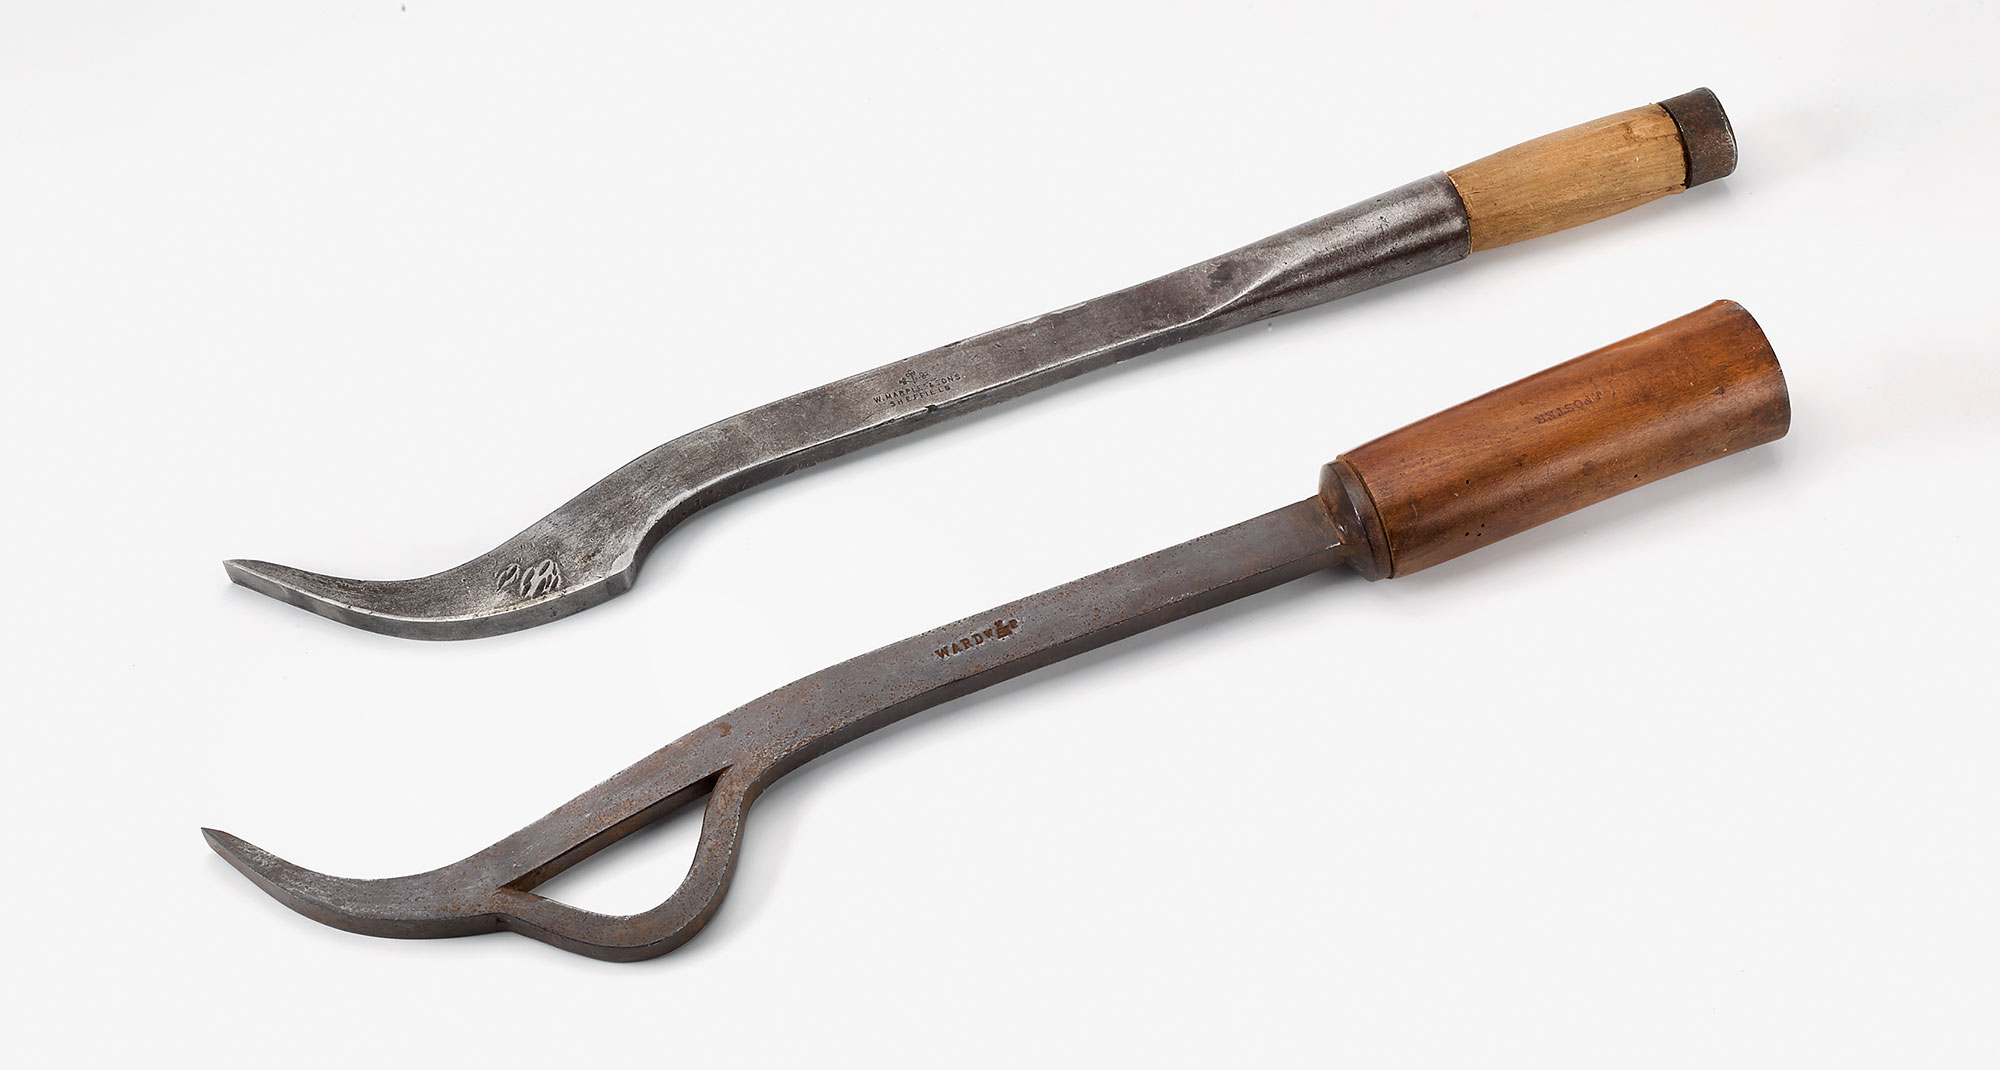 At the top is shown the standard type mortise chisel; below it is shown a swan’s neck mortise chisel